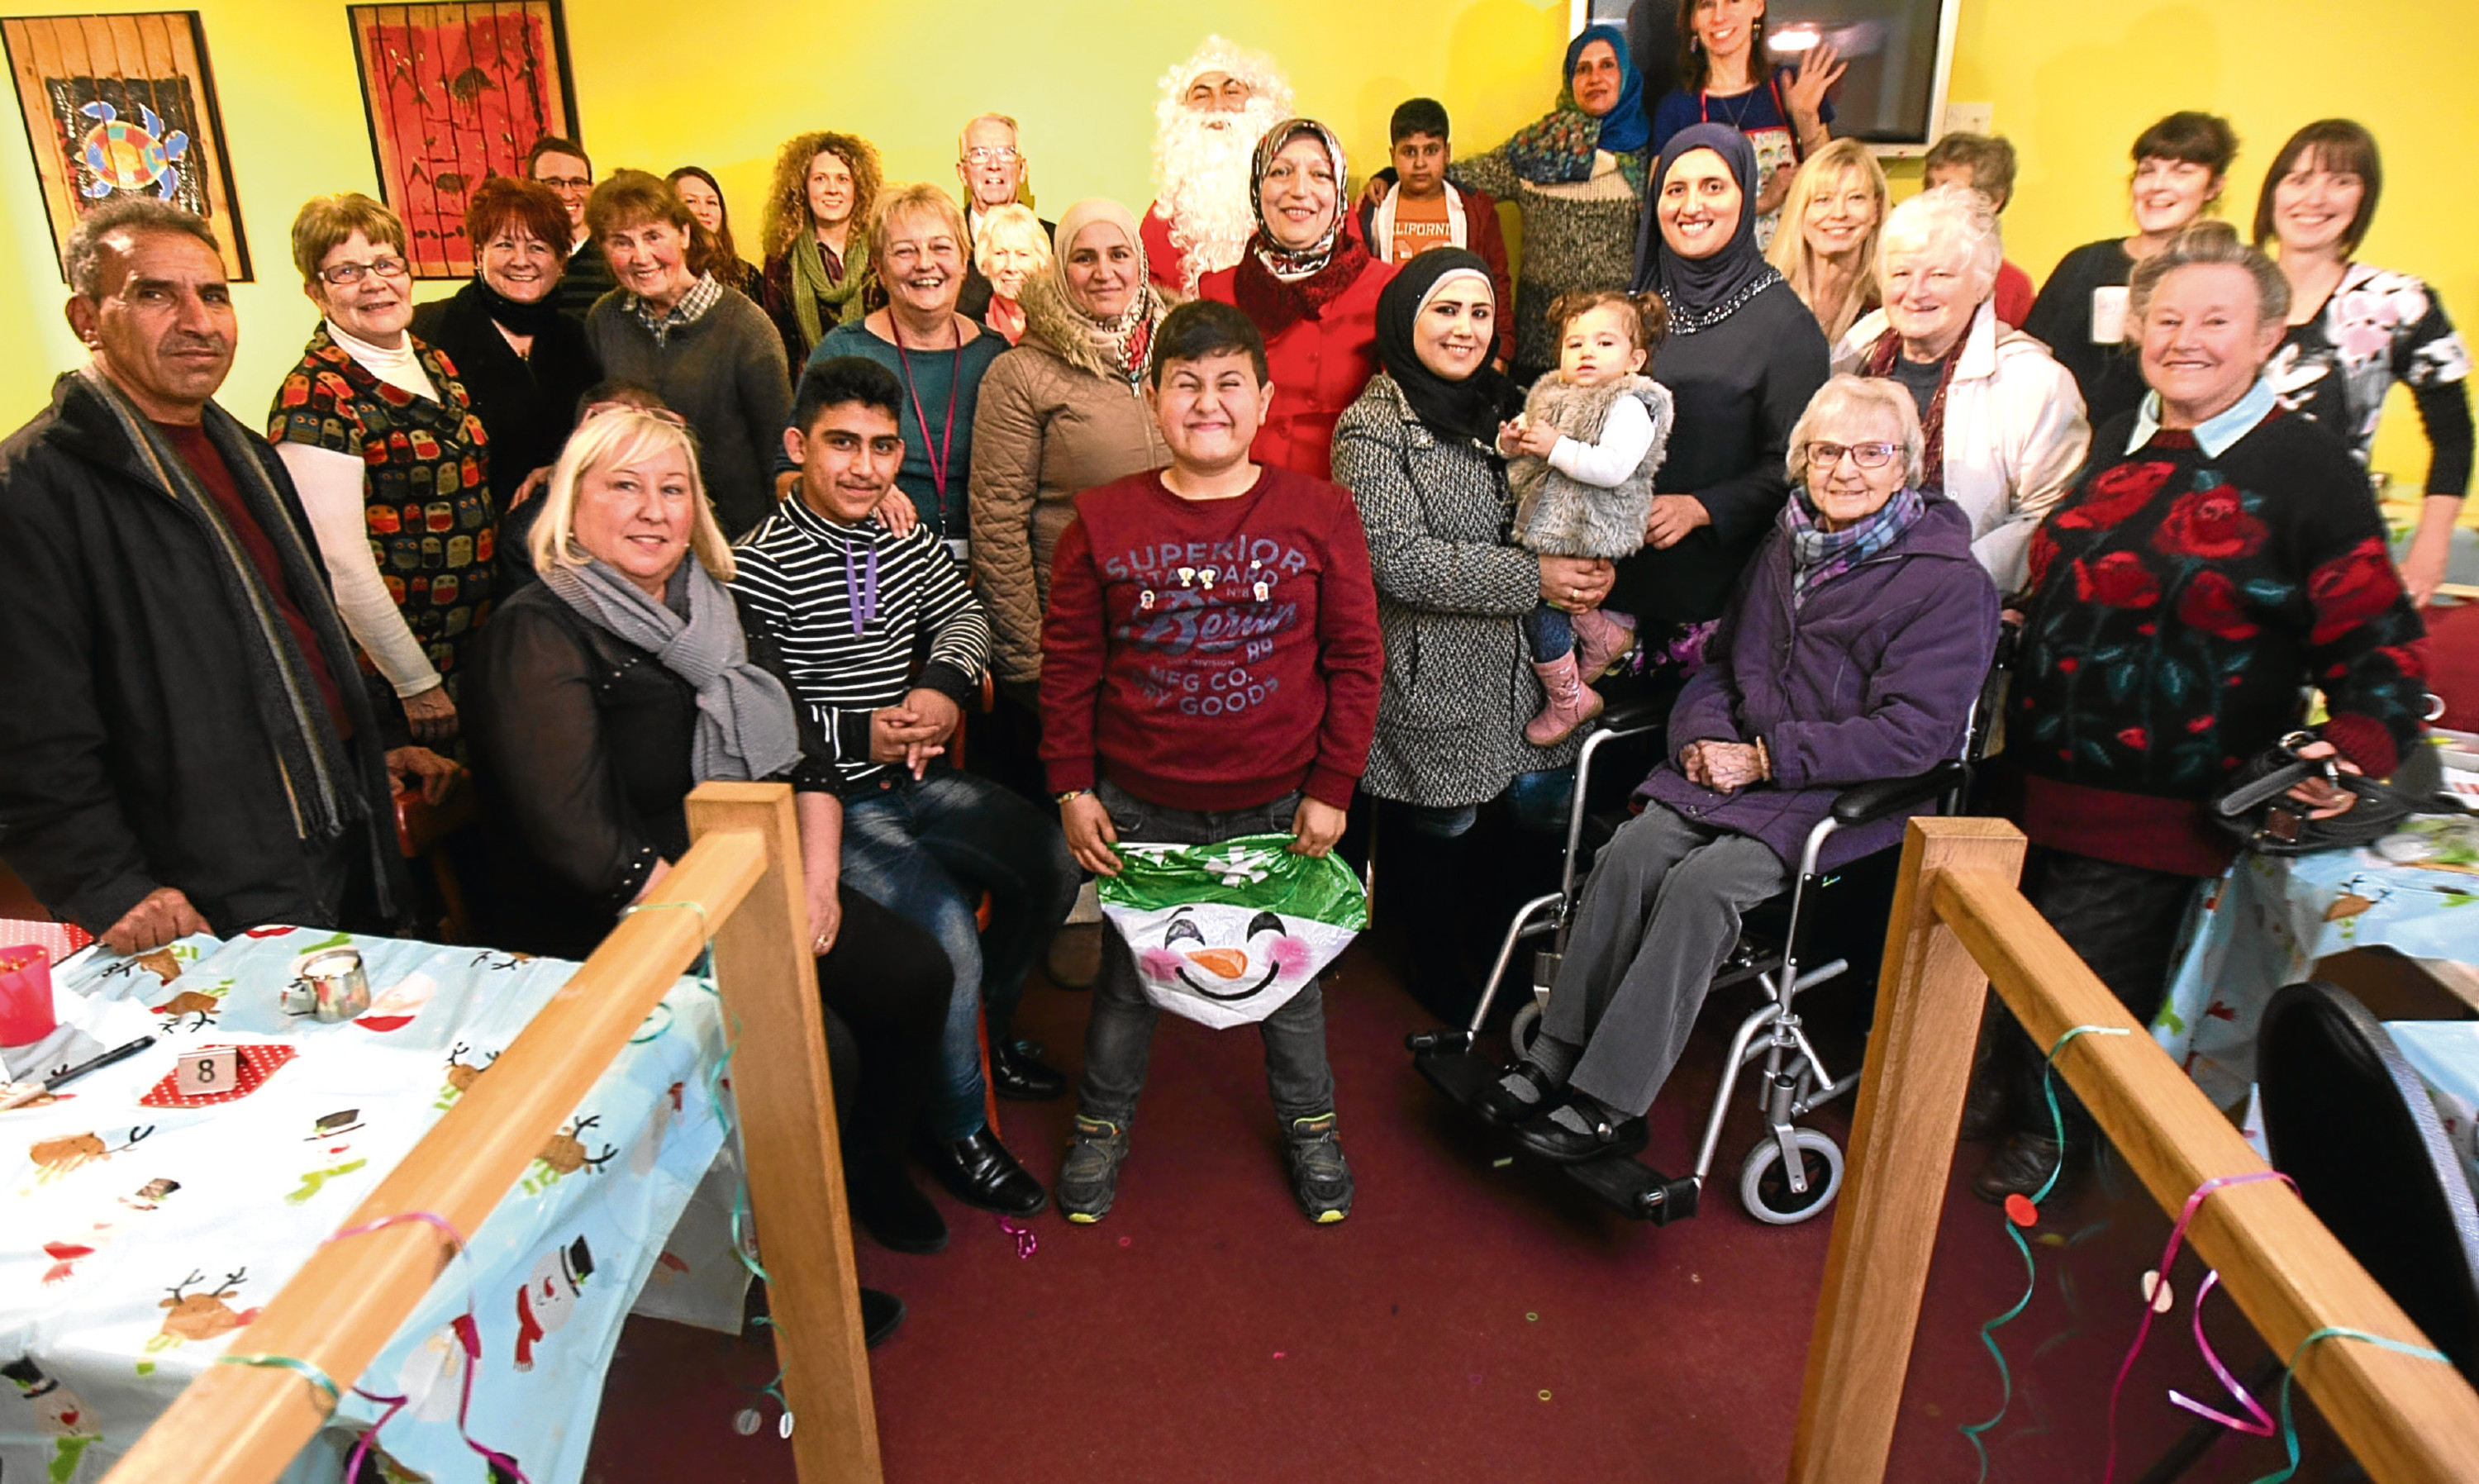 Syrian refugee families and the Polish Community get together to run a multicultural festive cafe in Arbroath. Alex worries about our reactions now compared to when we welcomed Italian immigrants such as his late neighbour into the country in the 1960s.